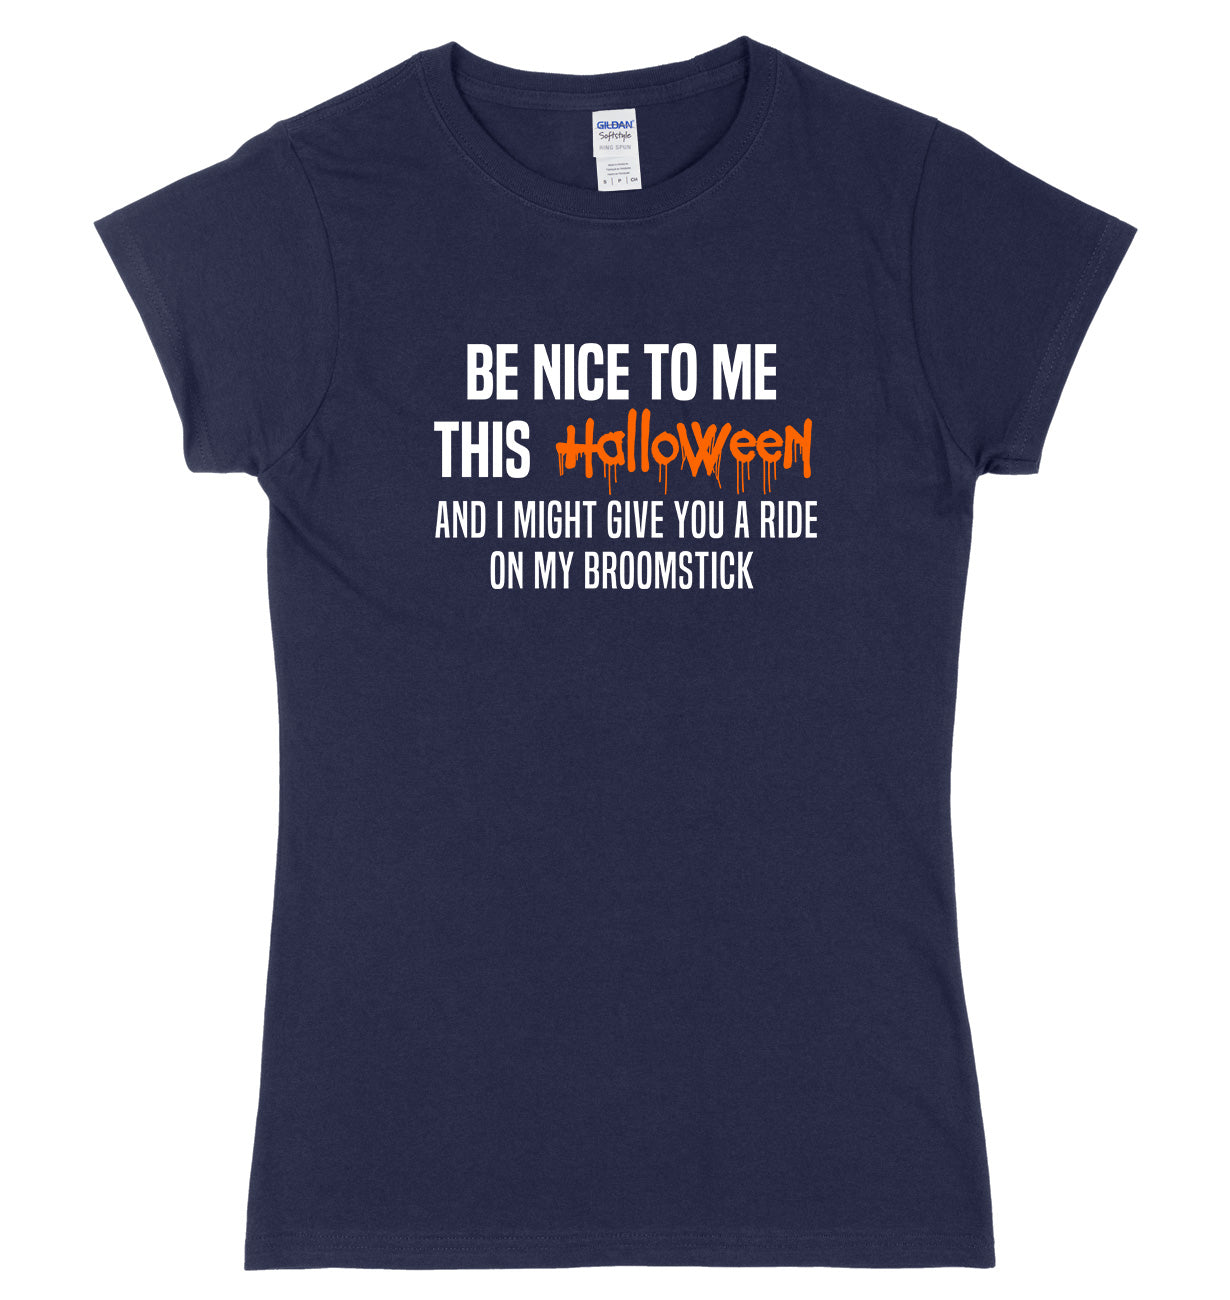 Be Nice To Me This Halloween And I Might Give You A Ride On My Broomstick Womens Ladies Slim Fit Halloween T-Shirt